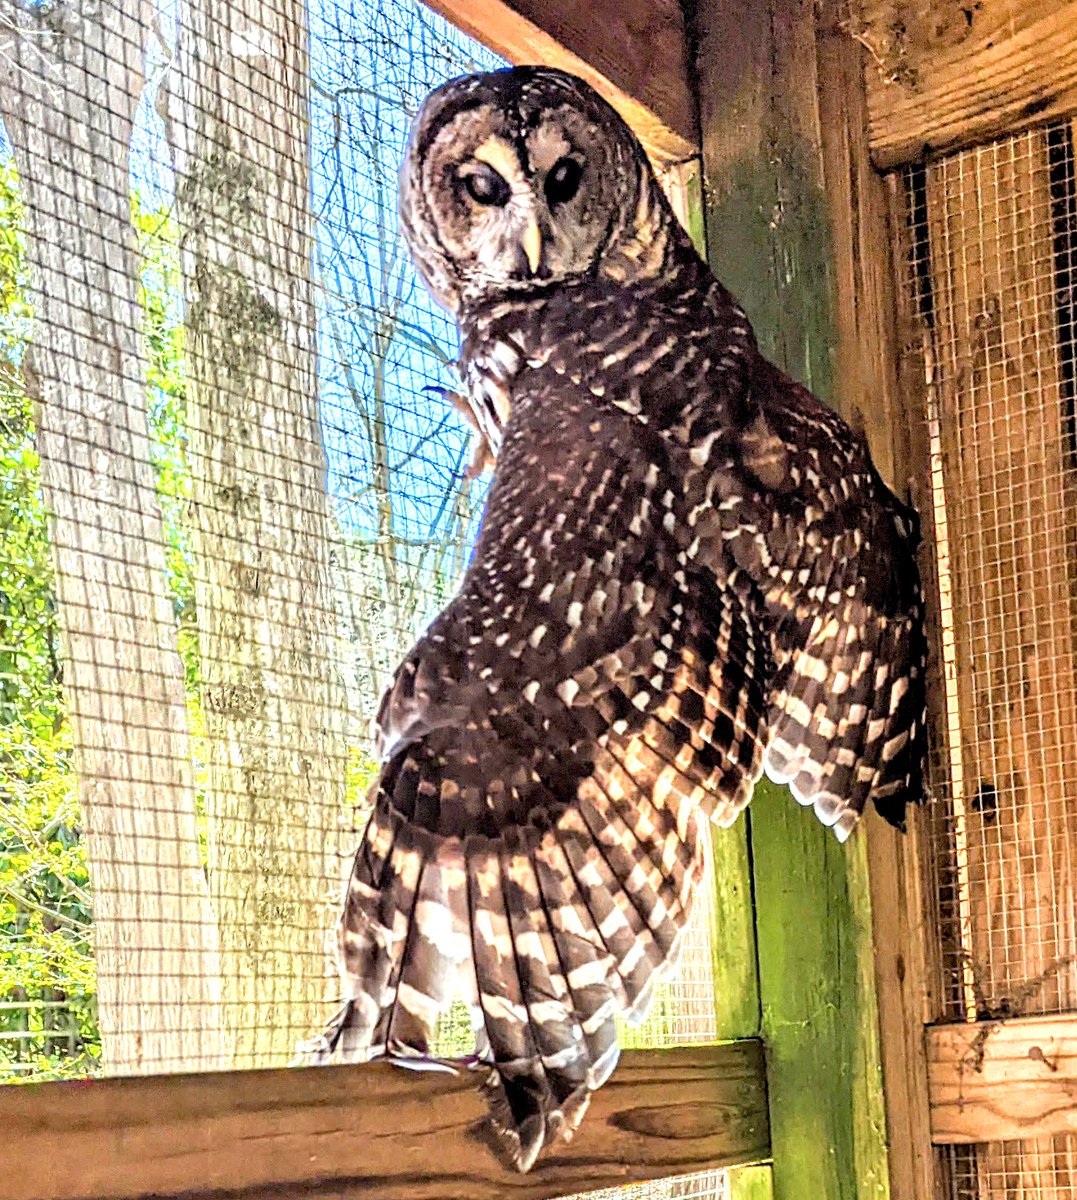 Owls, the nocturnal maestros of mystery! 🌙🦉 With their silent wings and piercing eyes, they embody an enigmatic elegance that captivates our imagination. They're nature's detectives, surveying the nocturnal heavens with unwavering wisdom. #Owls #MastersofMystery #BarredOwl